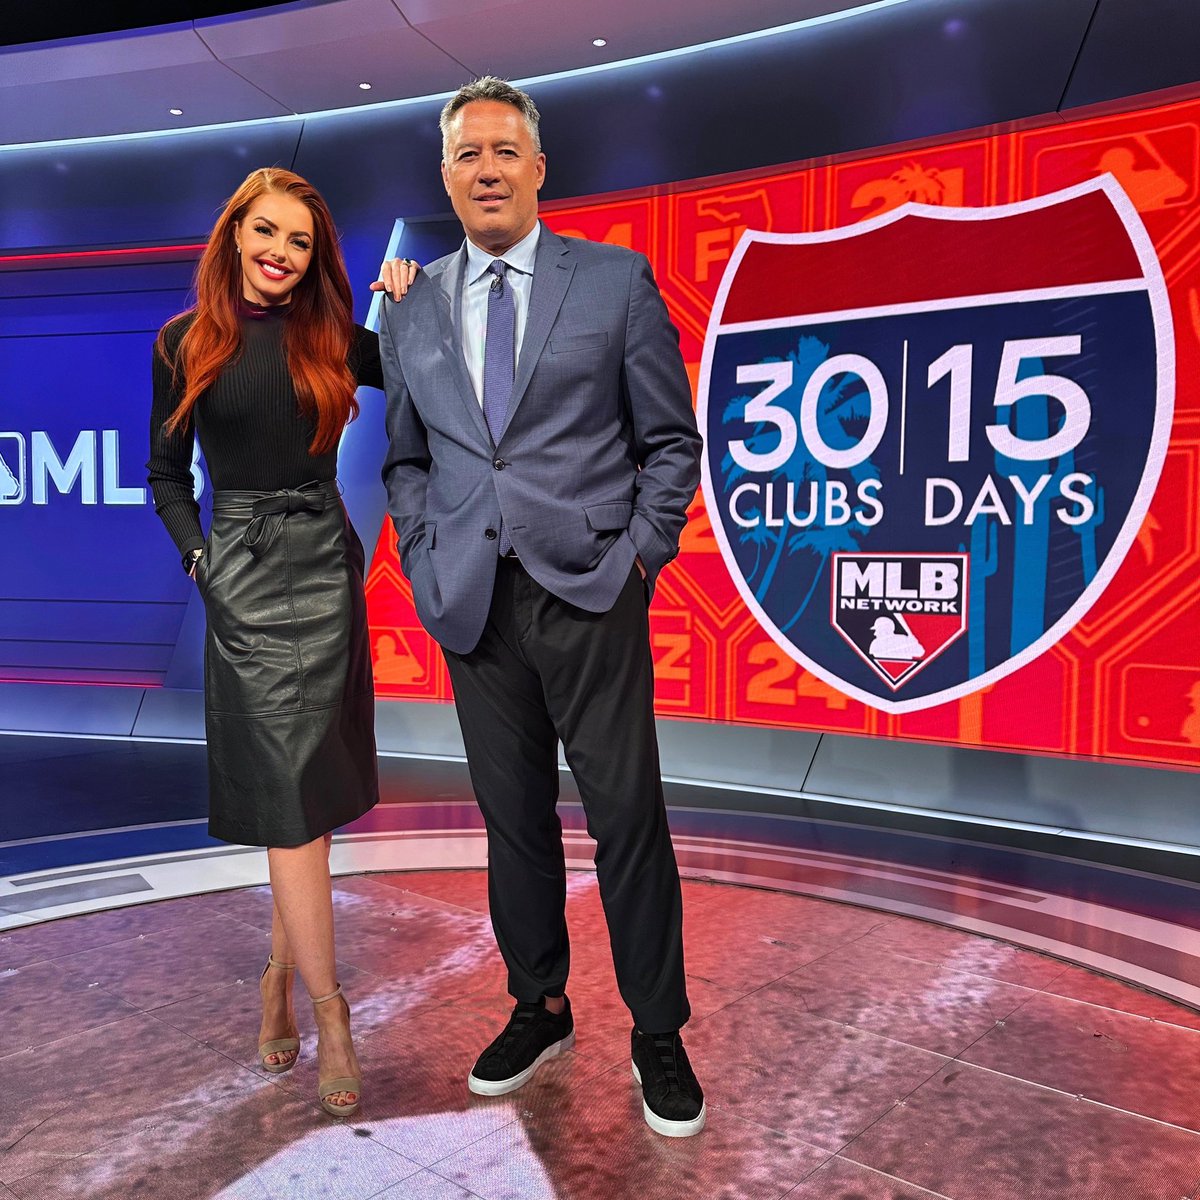 No better way to dive back into @MLBNetwork than by working with the best!